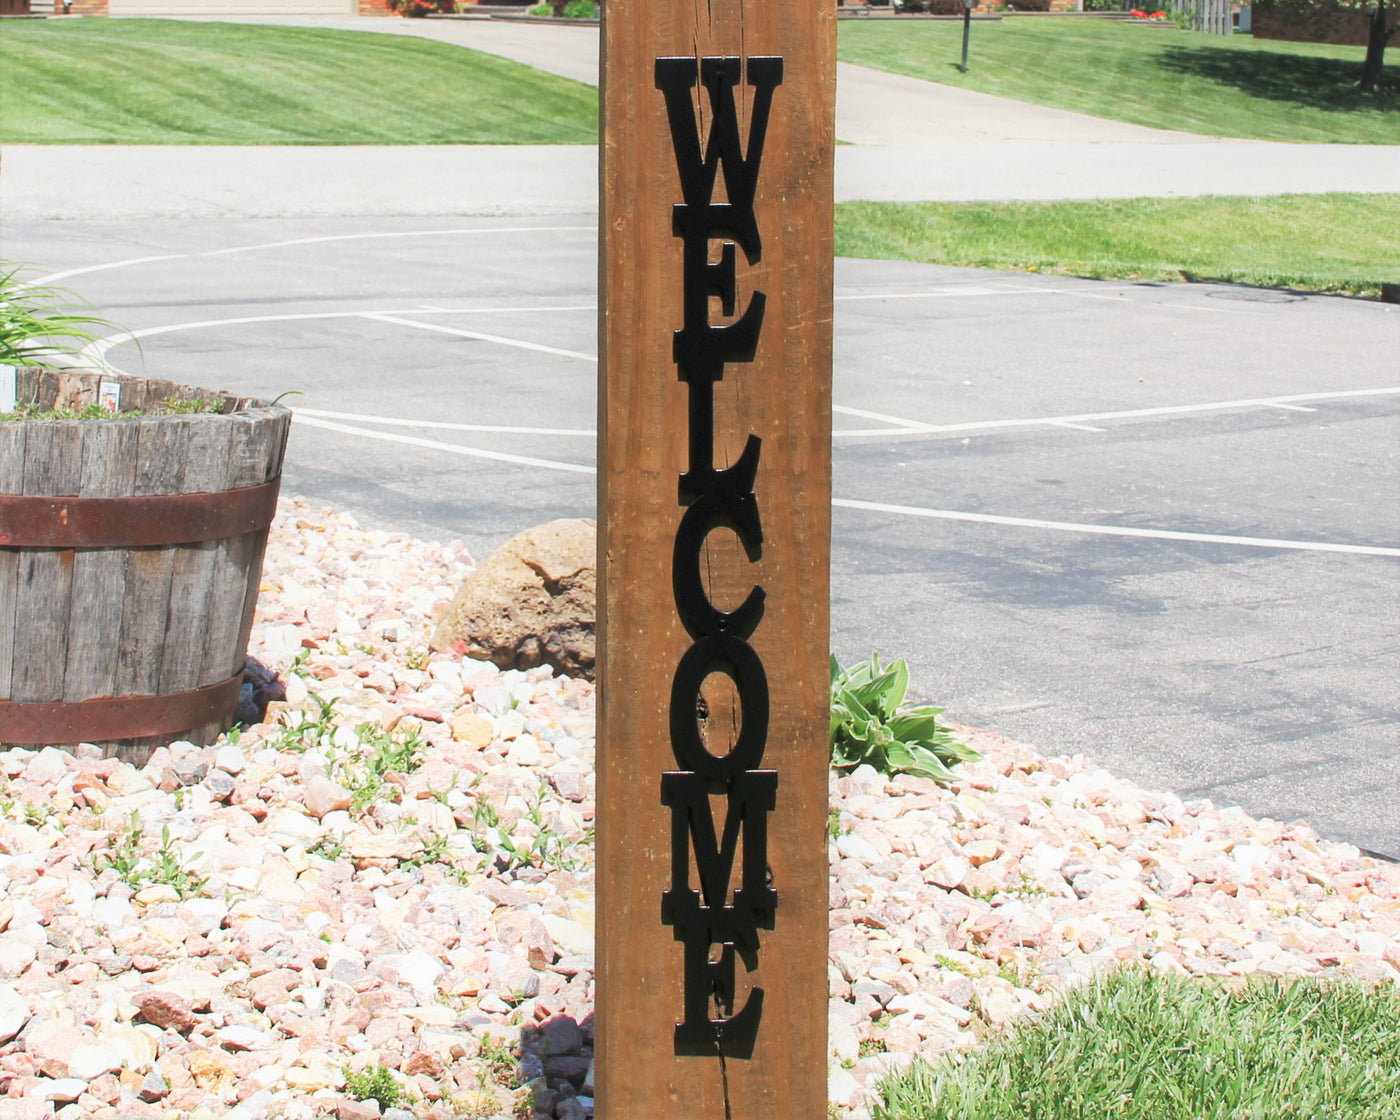 Vertical Welcome Sign - Madison Iron and Wood - Mailbox Post Decor - metal outdoor decor - Steel deocrations - american made products - veteran owned business products - fencing decorations - fencing supplies - custom wall decorations - personalized wall signs - steel - decorative post caps - steel post caps - metal post caps - brackets - structural brackets - home improvement - easter - easter decorations - easter gift - easter yard decor